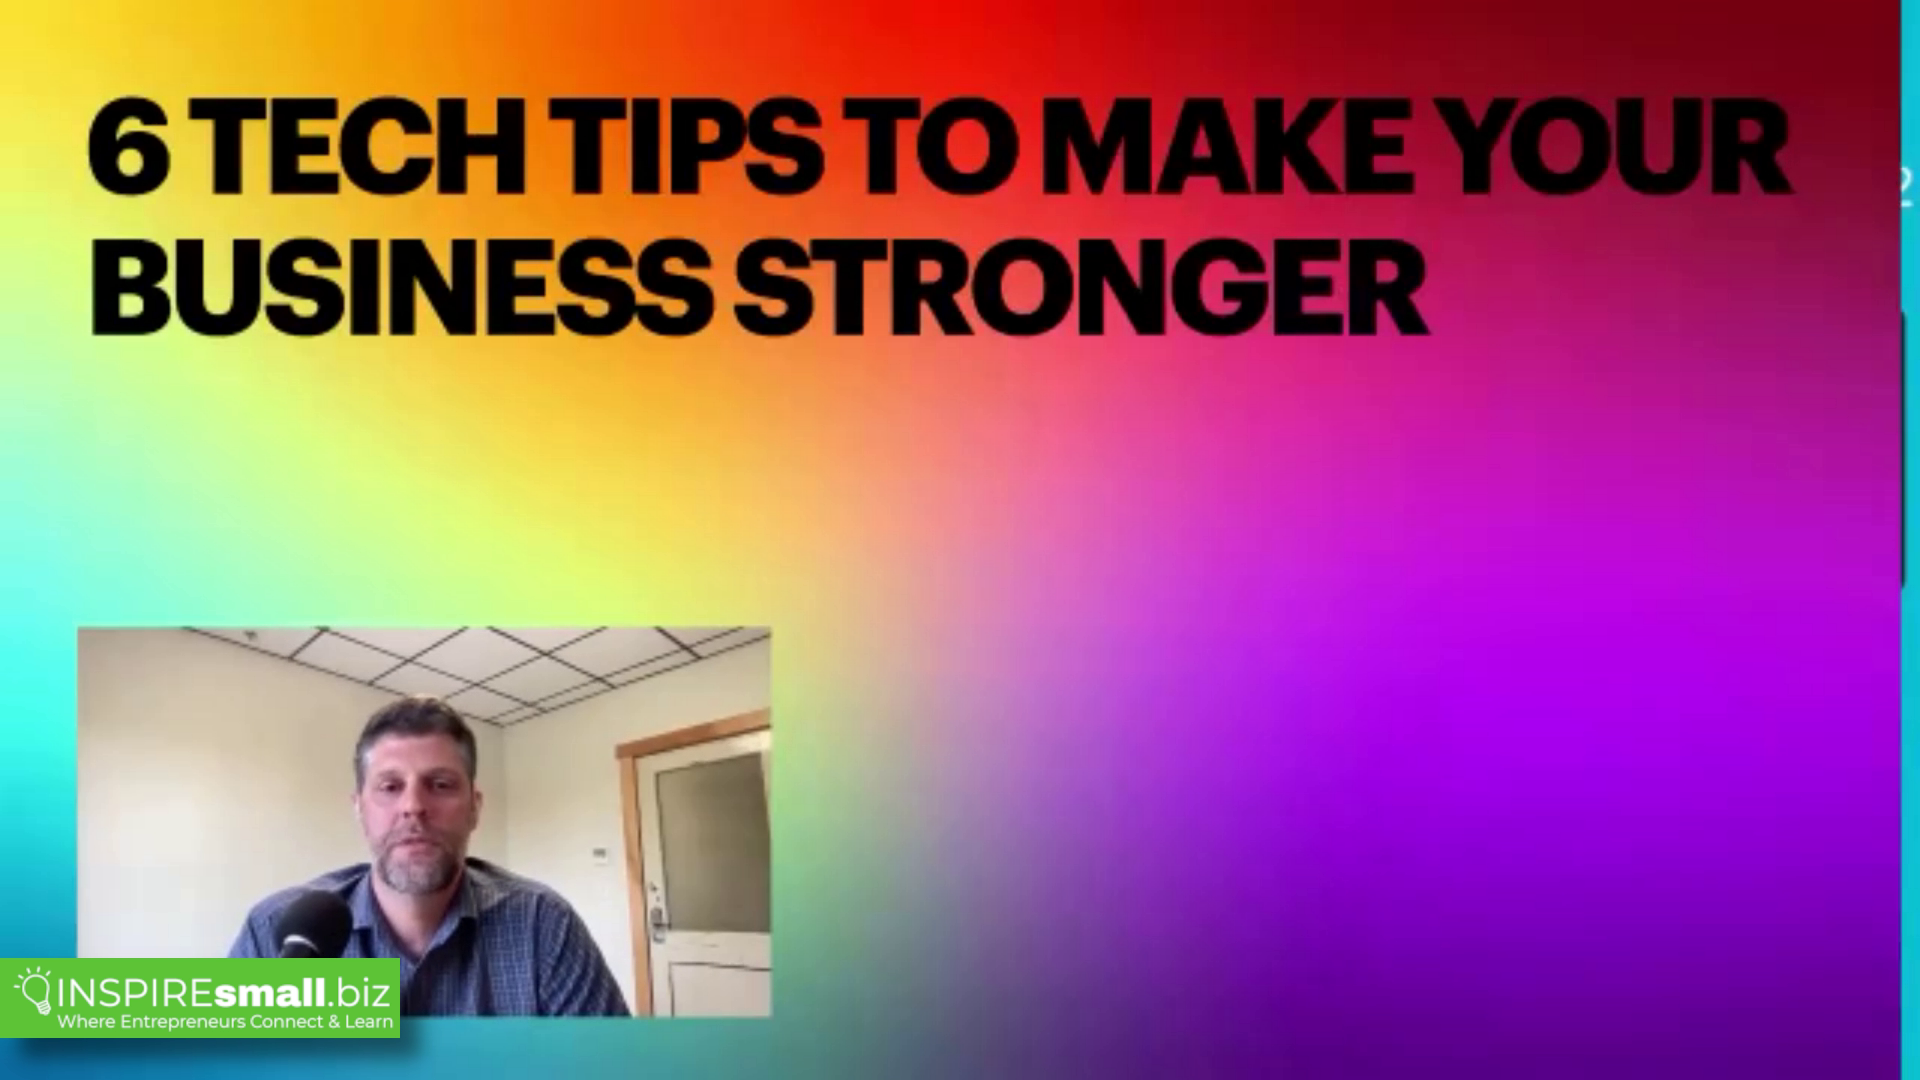 6 Tech Tips to Make Your Business Stronger